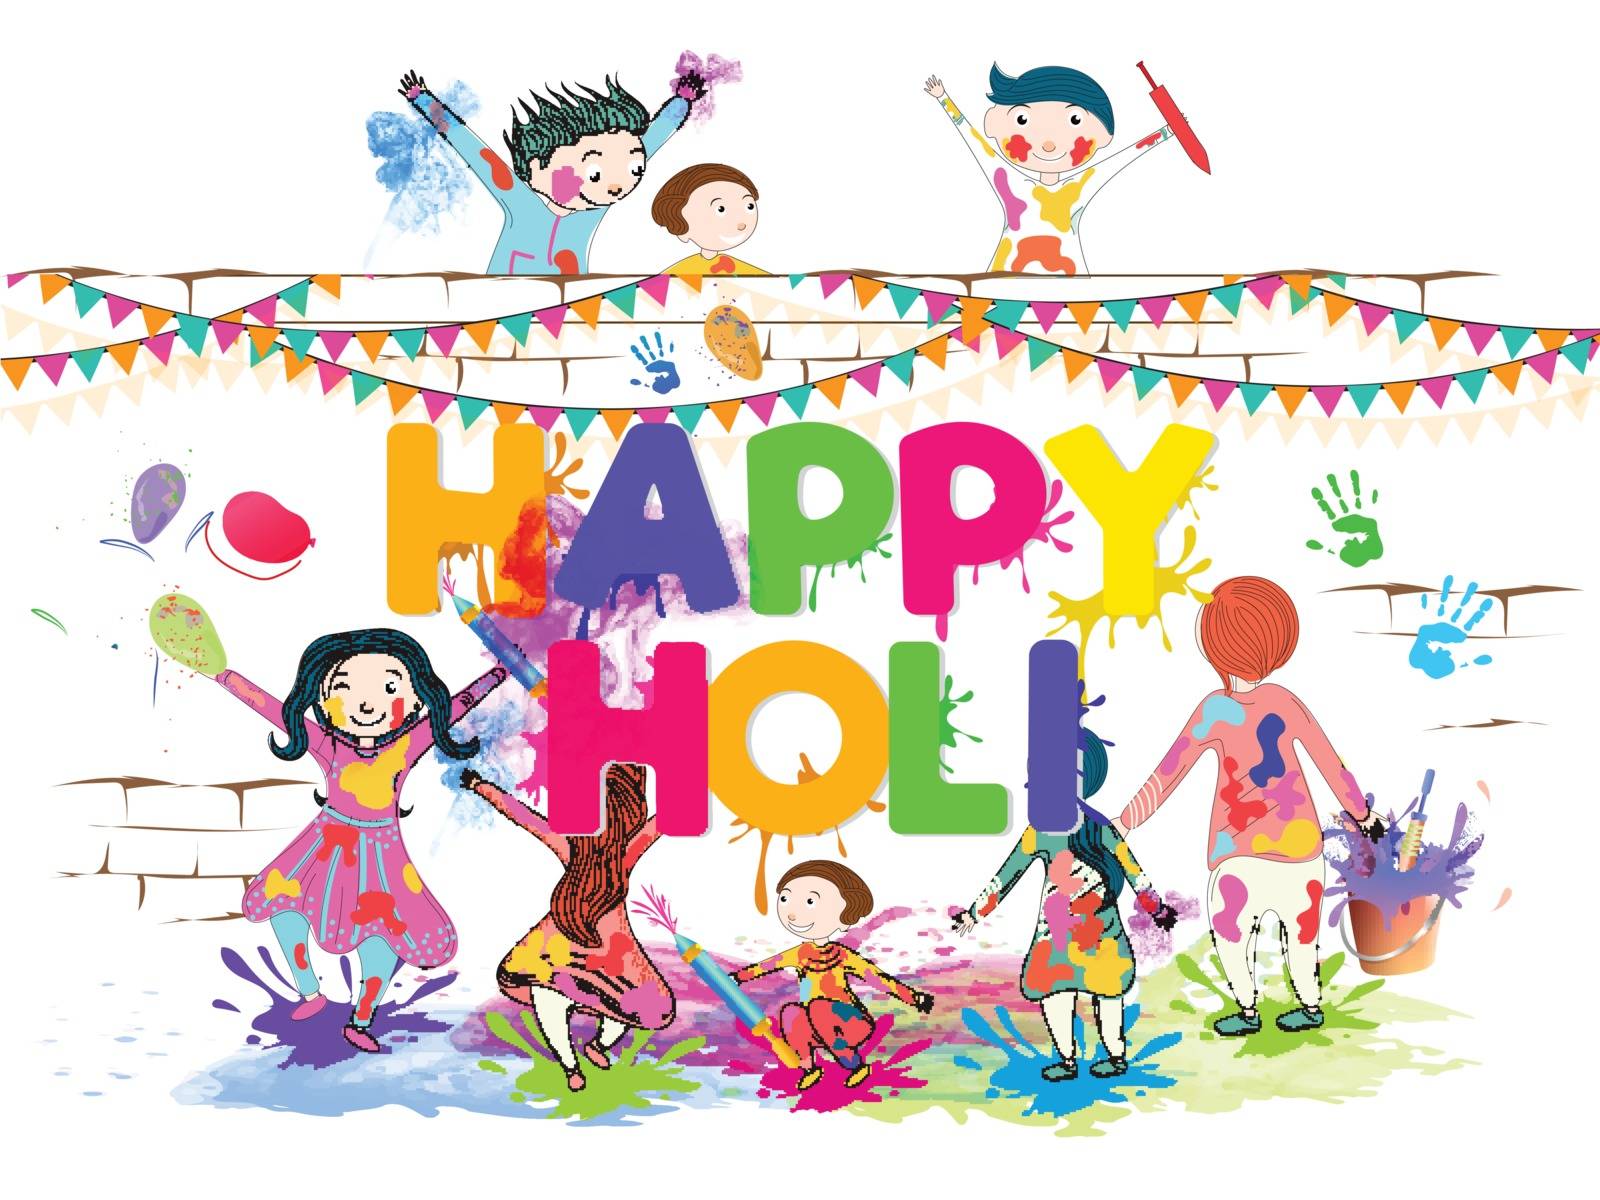 Cute kids playing with colours on occasion of Happy Holi festival, poster or banner design.